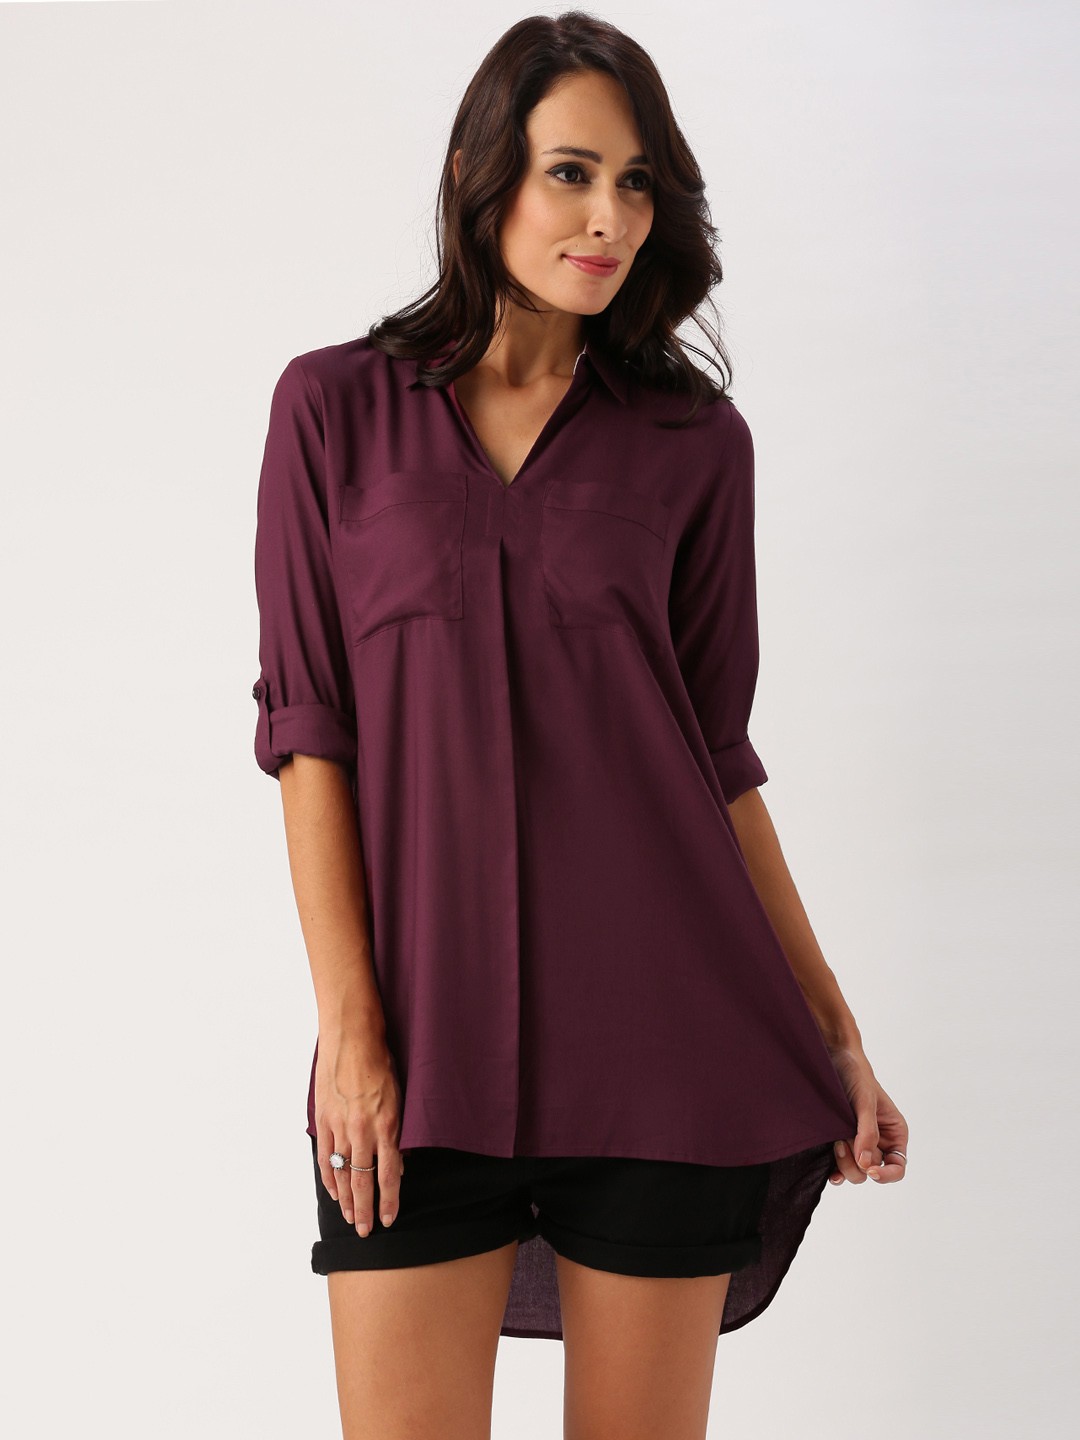 All About You from Deepika Padukone Women Burgundy Solid Shirt Style Top